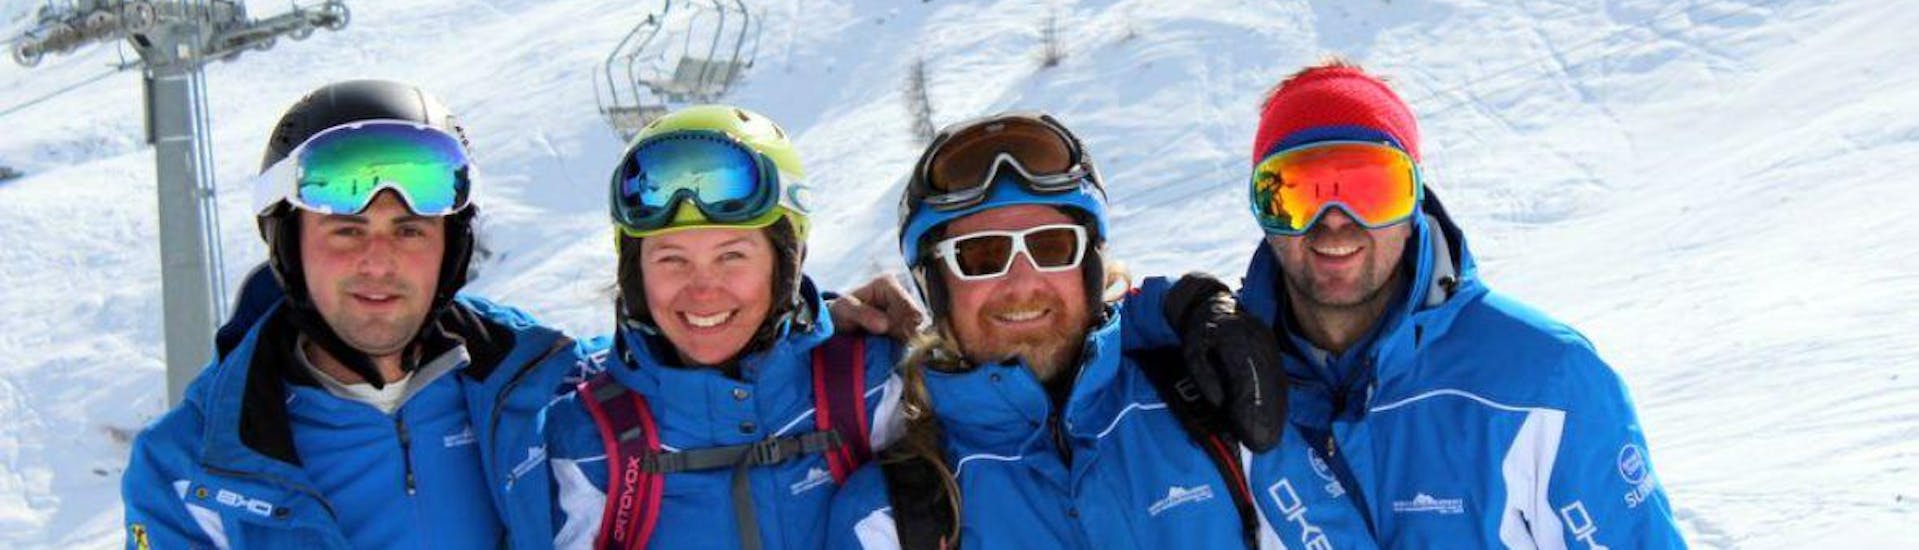 Four ski instructors from White Element Skischule Sillian are smiling at the camera as they prepare to hold their ski lessons in Sillian-Hochpustertal.